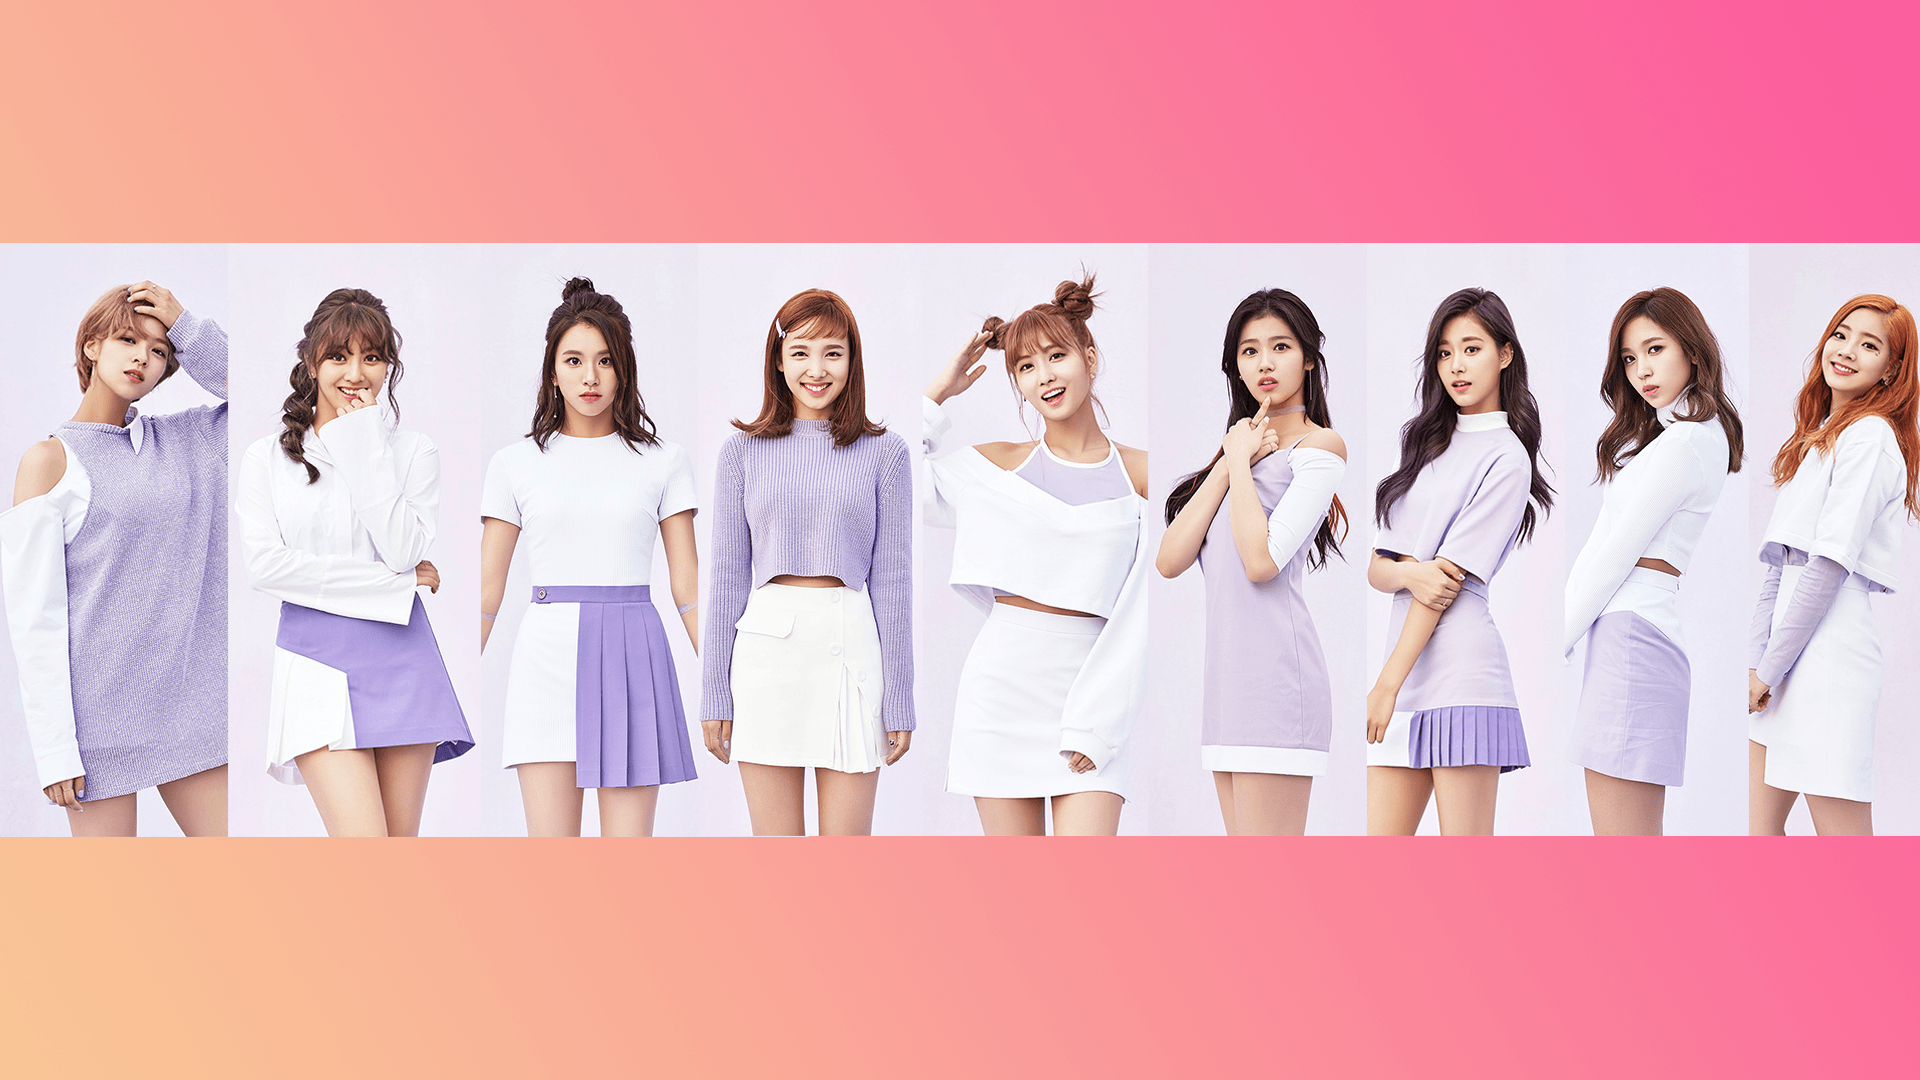 Twice Tt Wallpaper Group , Download for free